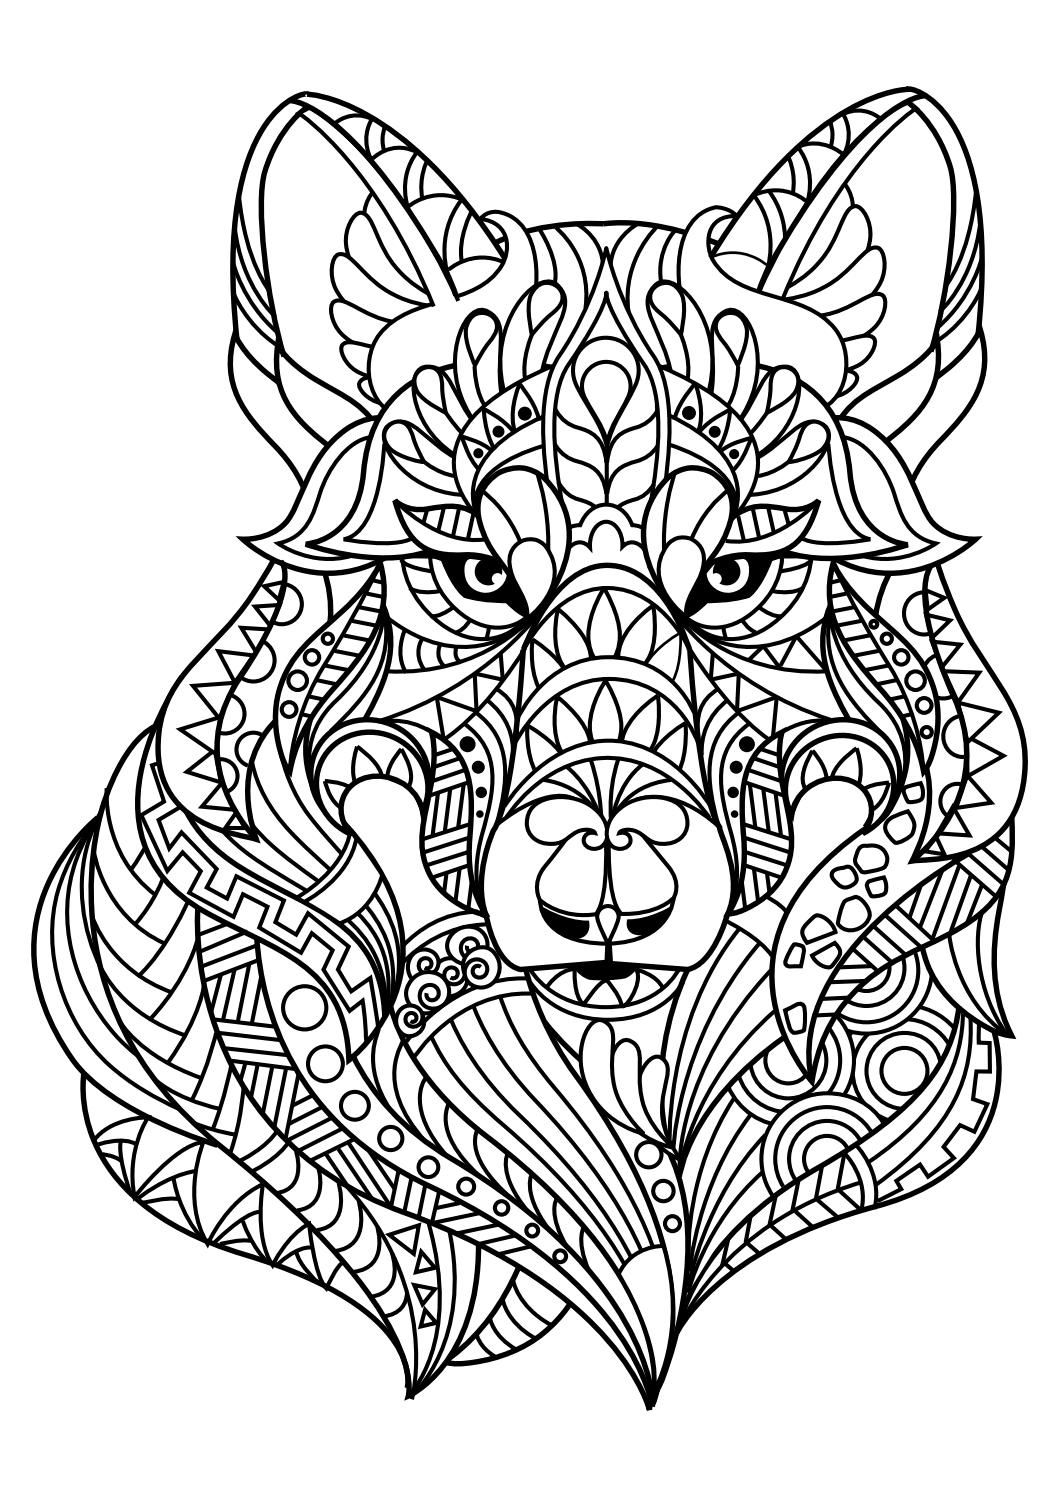 Animal Coloring Pages Pdf   Animal Coloring Books, Dog Coloring ...